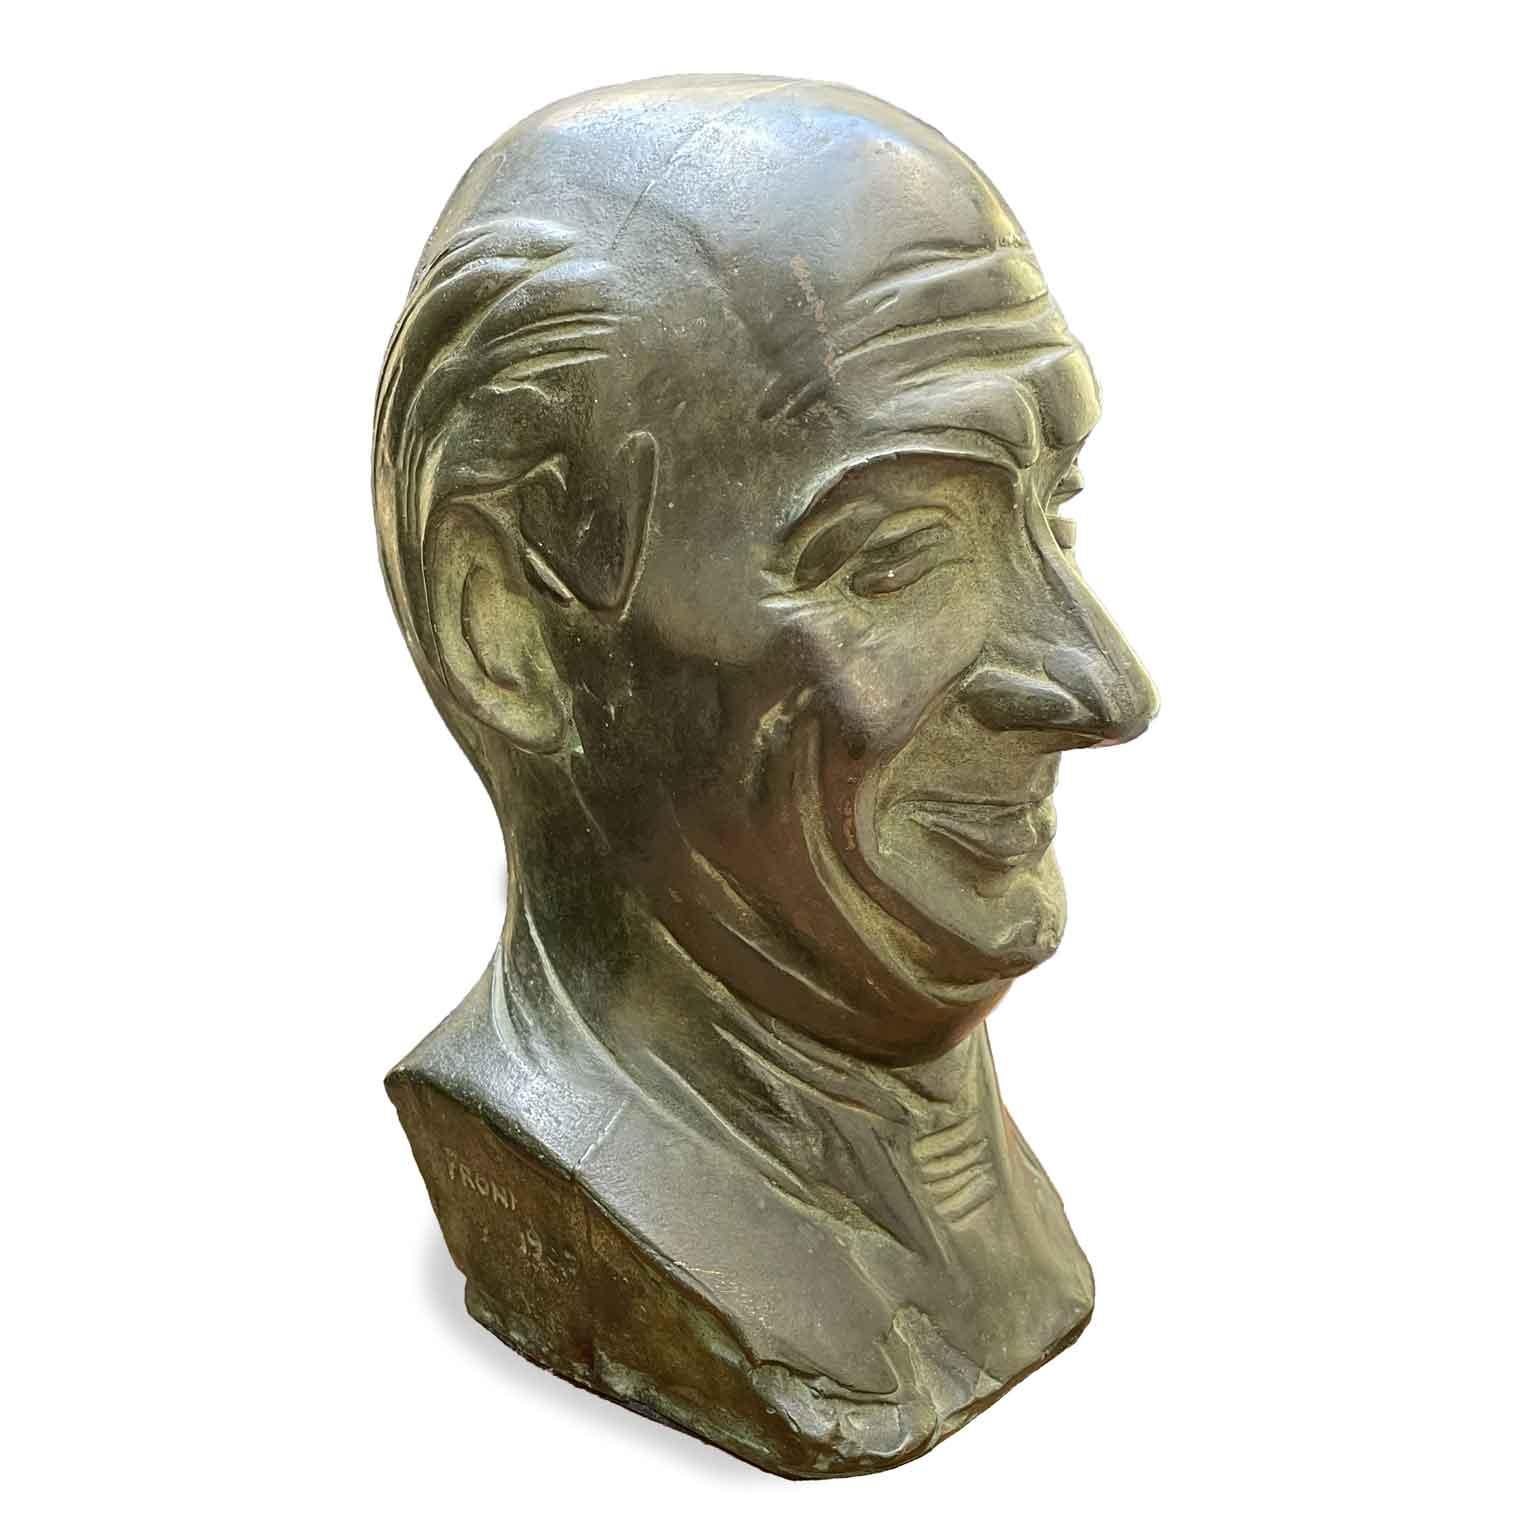 Caricature face of a smiling man by the Italian Sculptor Luigi Froni 1901-1965, sculptor from Parma specialized in portraiture, an half-bust cast bronze male figurative sculpture signed and dated 1959. An aged man with little hair, he blends